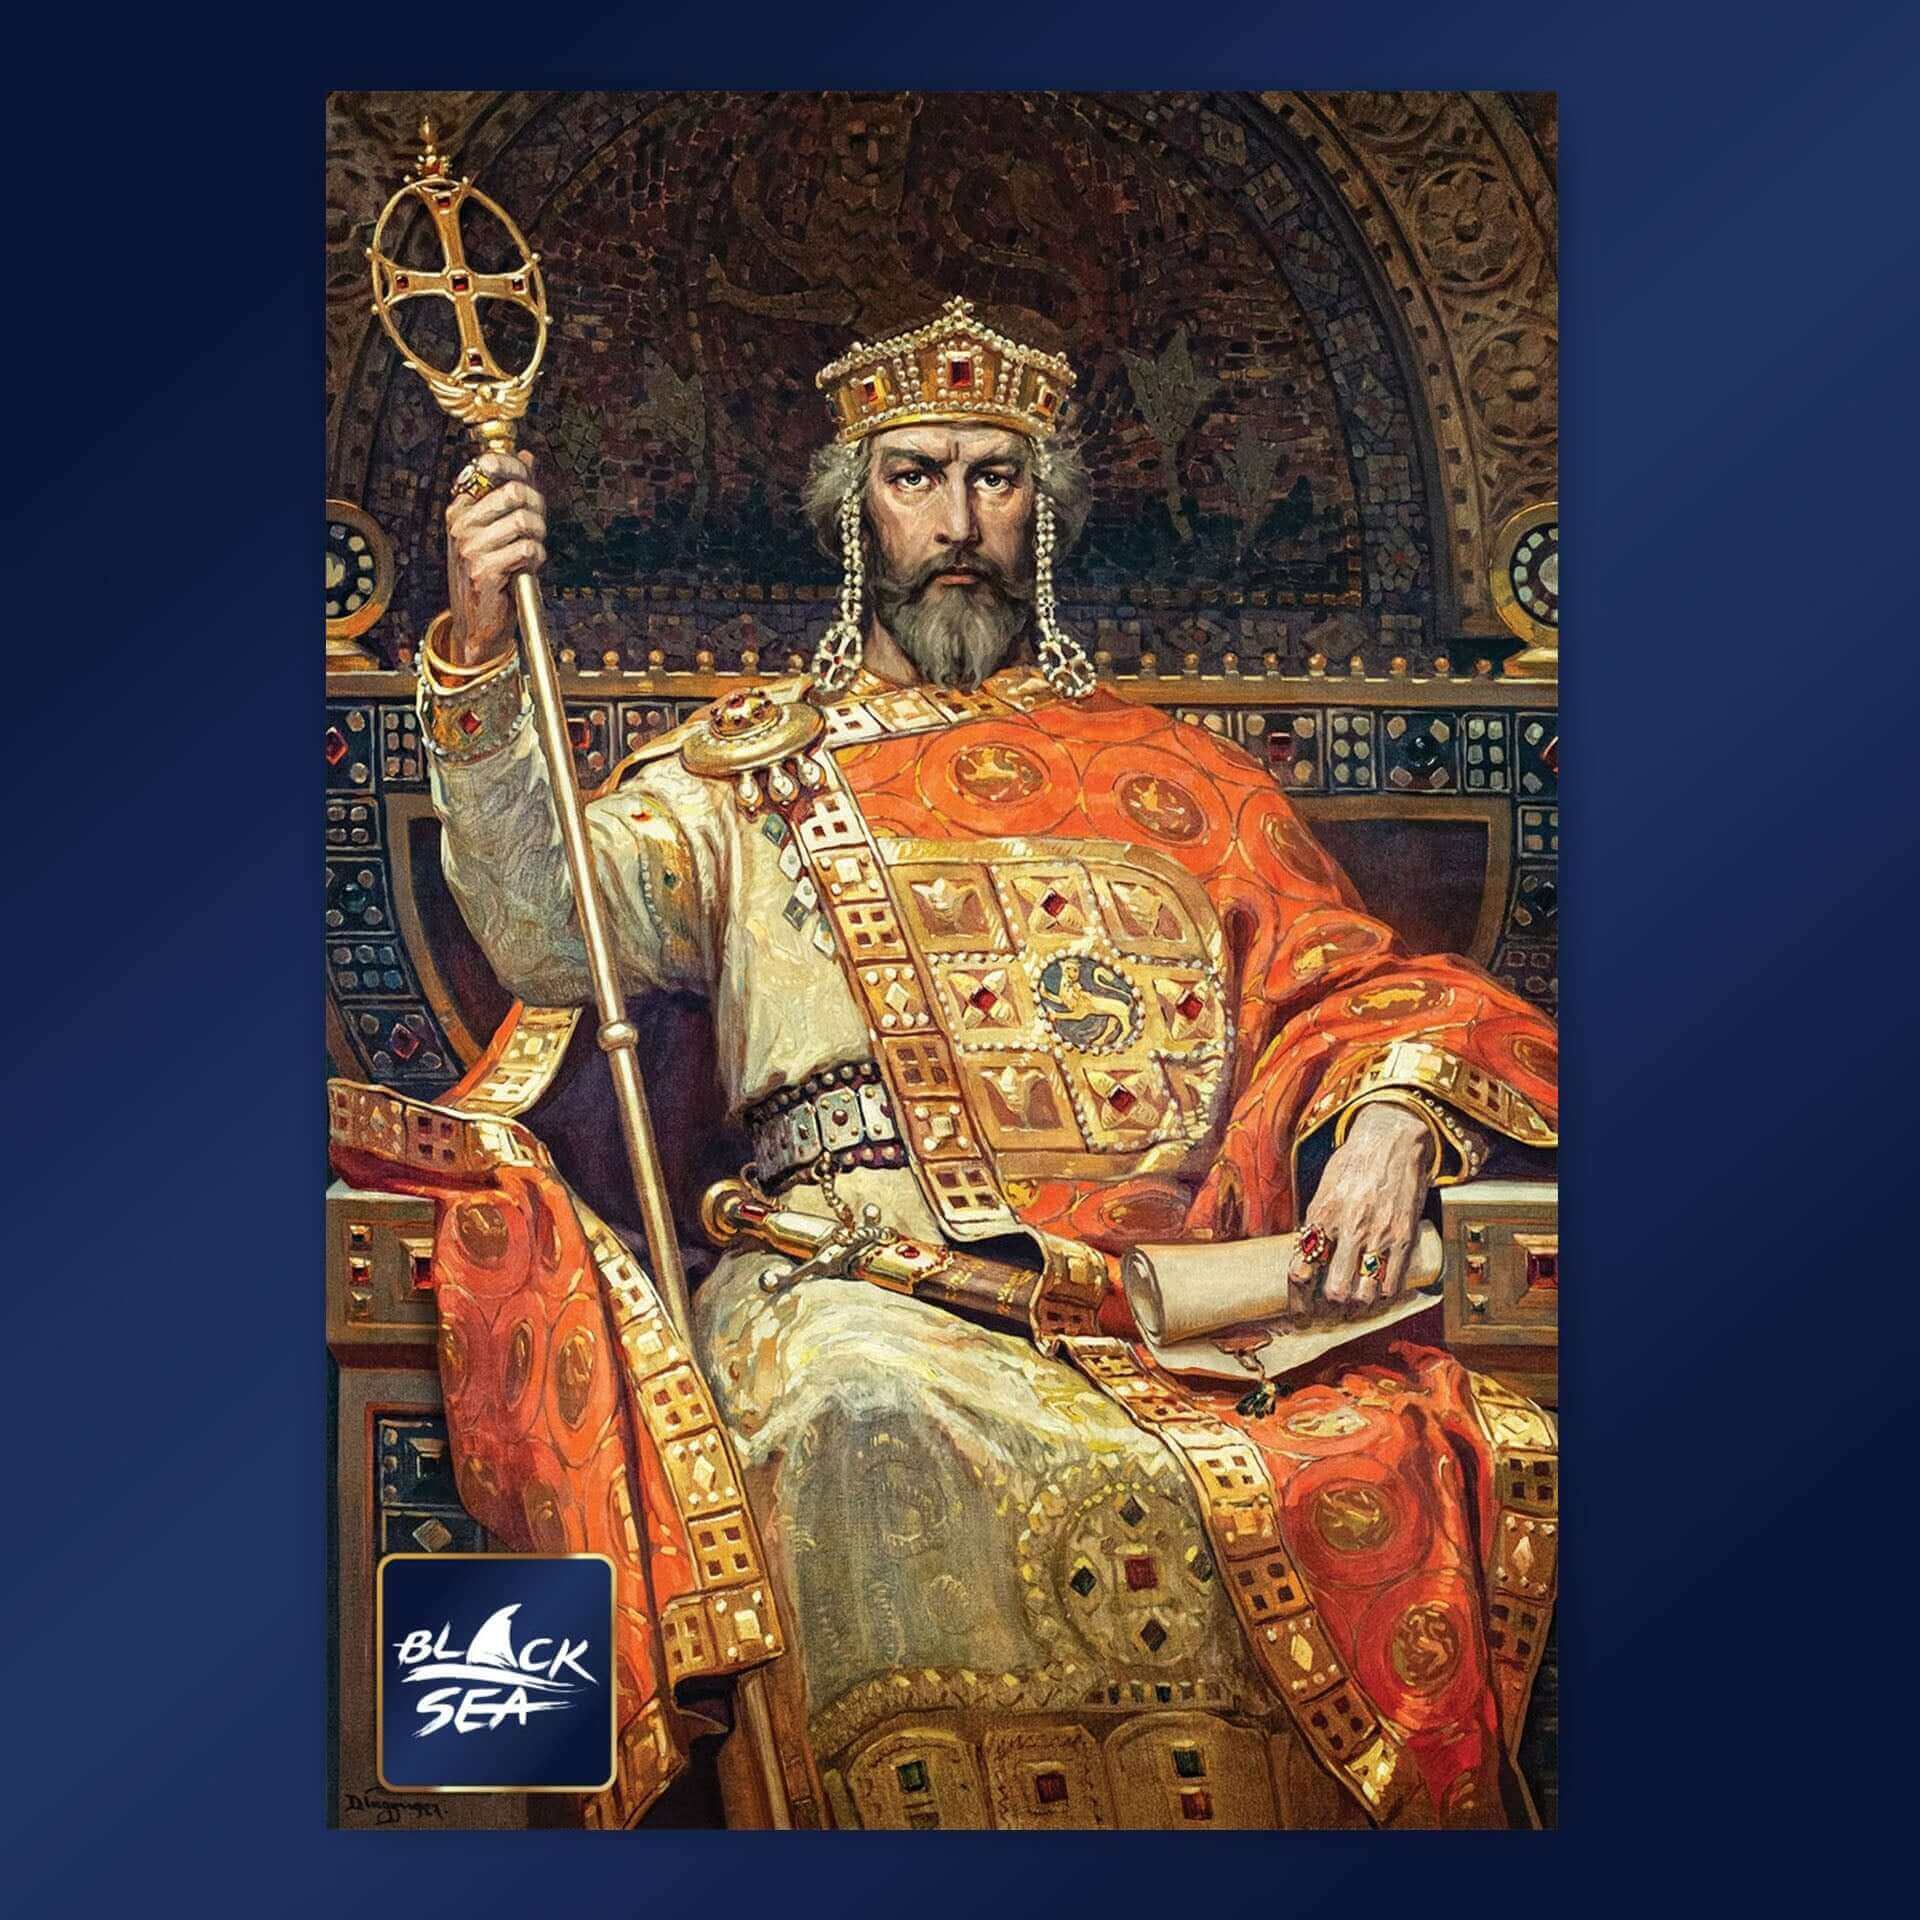 Puzzle Black Sea 2000 pieces - Tzar Simeon 1 the Great, Tzar Simeon I the Great is a Bulgarian ruler; he reigned from 893 to 927. Simeon the Great is the symbol of power, strength and cultural prosperity. His skillful home and foreign policies, along with